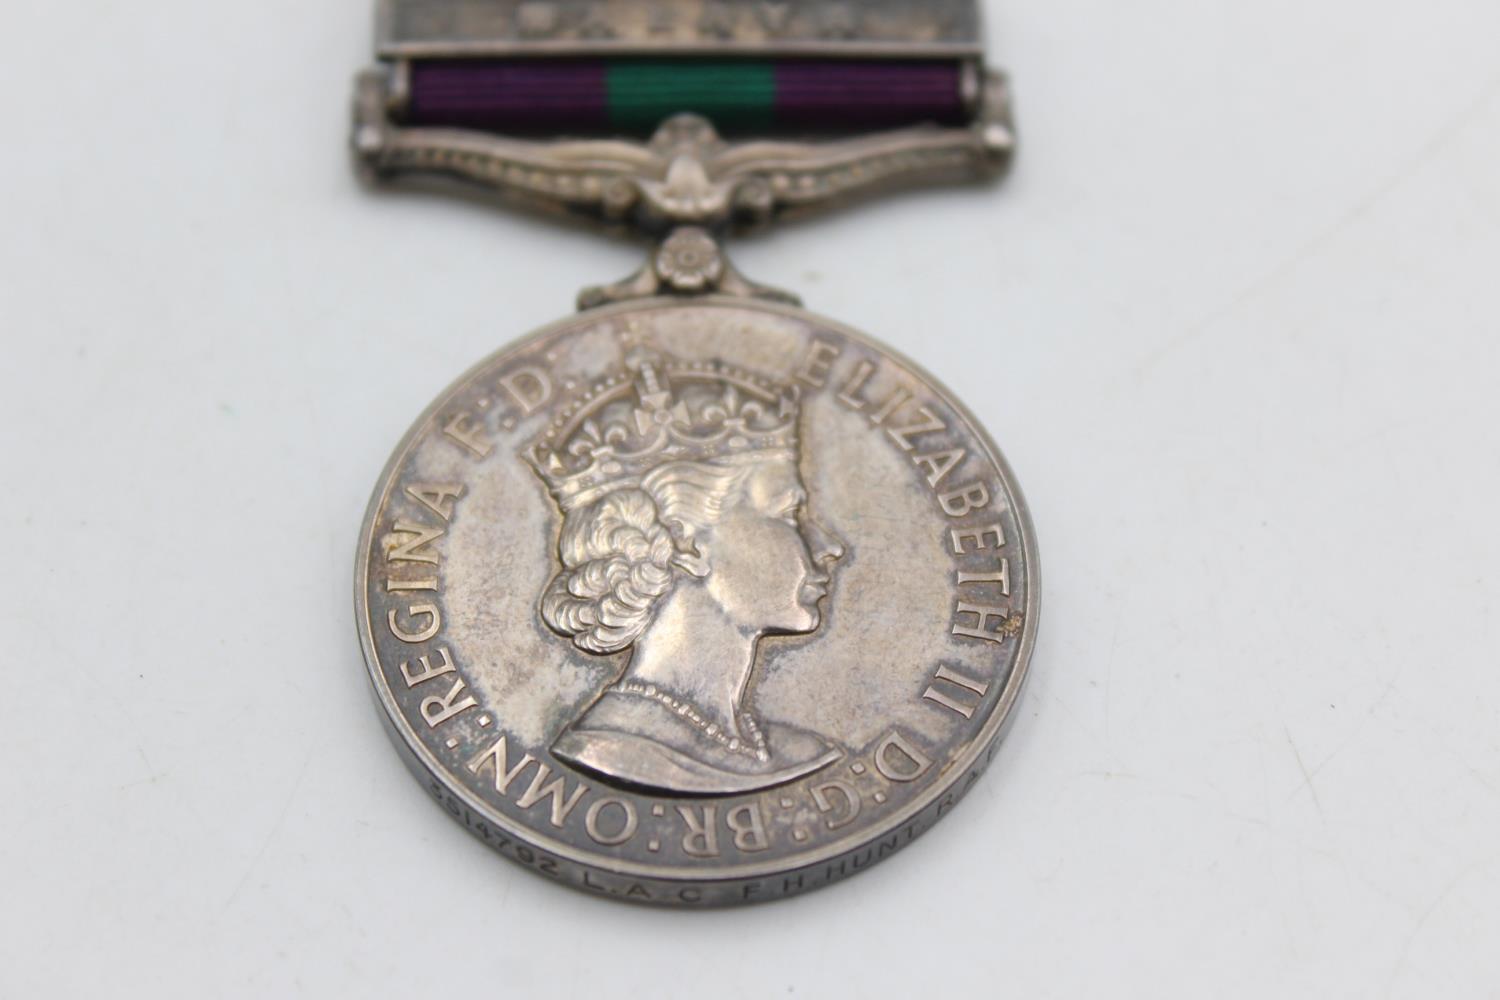 ER.II G.S.M Malaya Clasp Medal To 3514792 L.A.C F.H Hunt R.A.F In vintage condition Signs of use & - Image 3 of 5